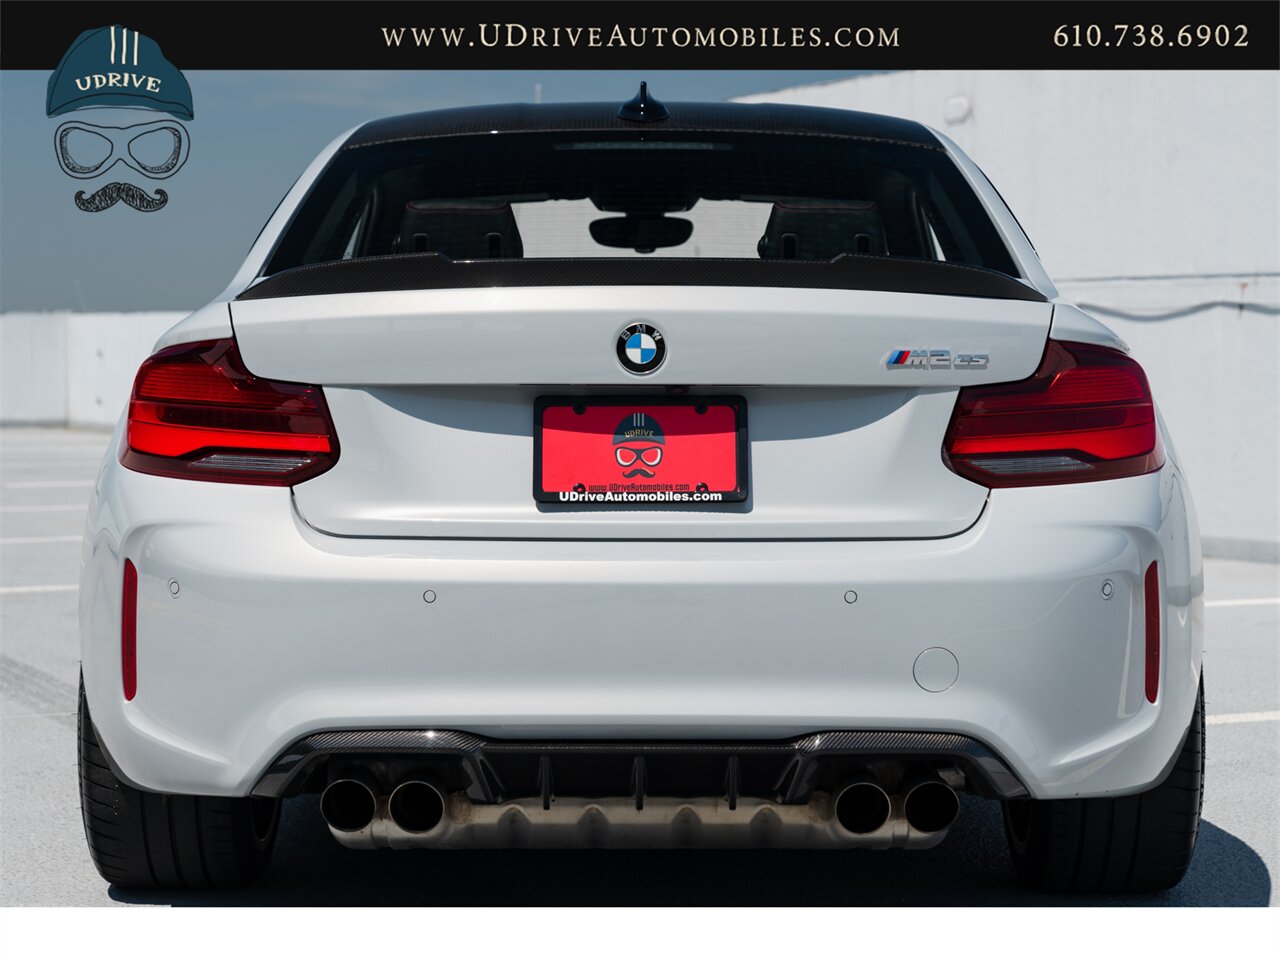 2020 BMW M2 CS  M2 CS 6 Speed Manual 2k Miles Full Body PPF Factory Warranty until 2025 - Photo 21 - West Chester, PA 19382